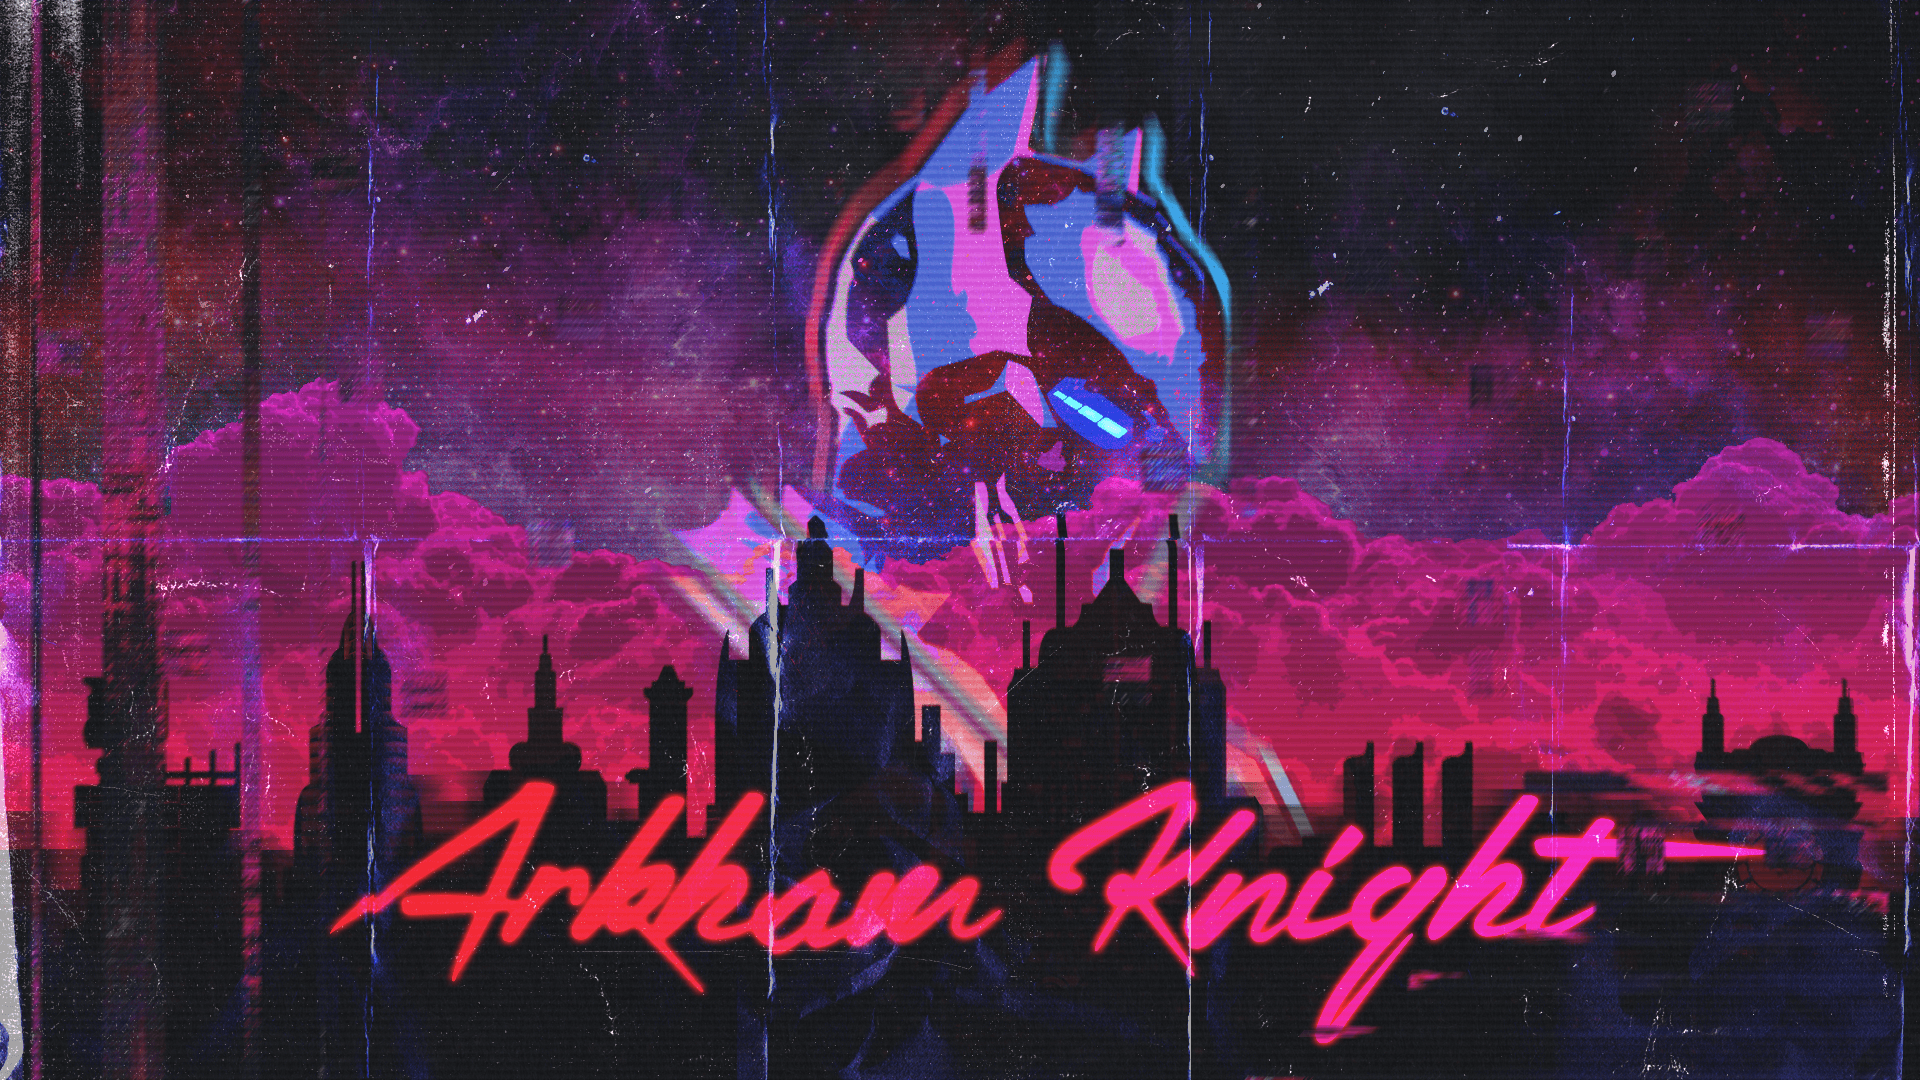 Retro Wave Anime GirlWallpapers